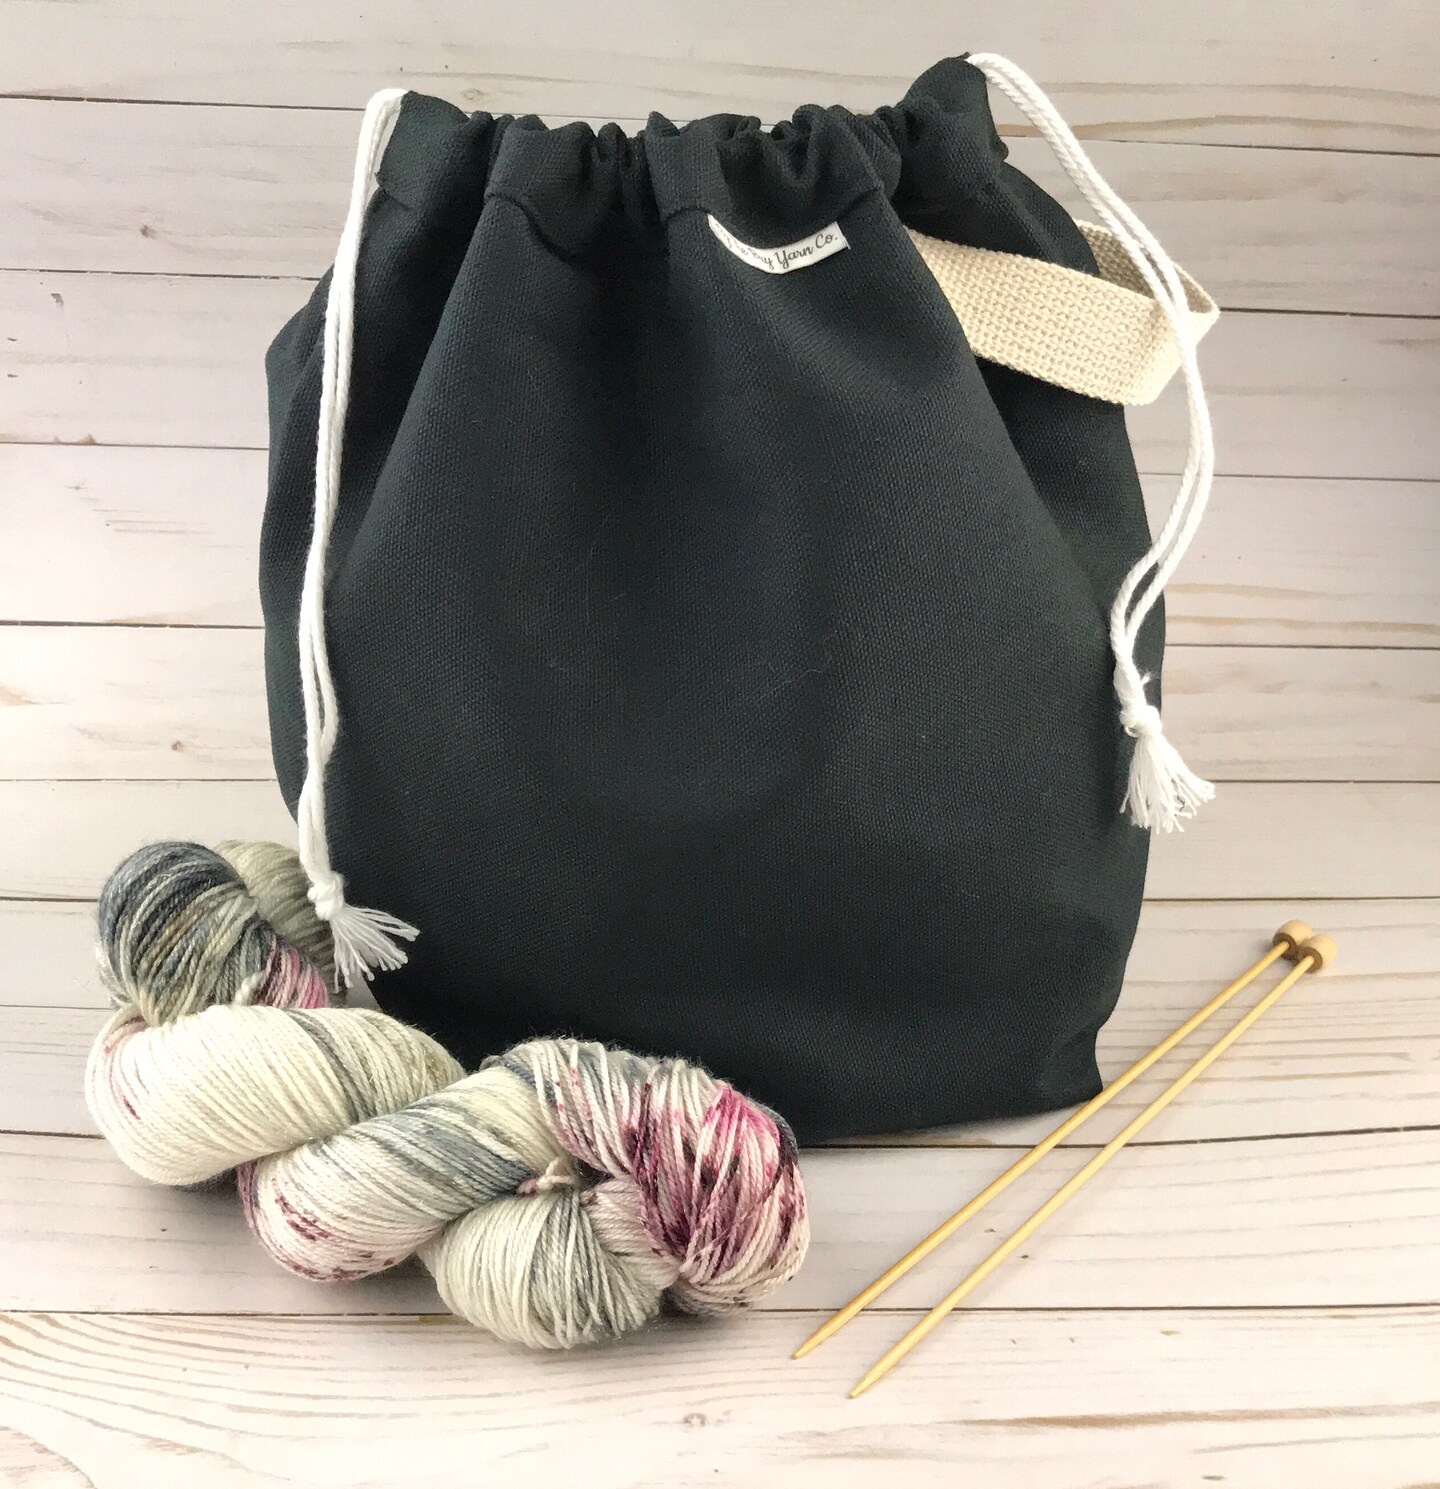 What's in Your Knit and Crochet Project Bag